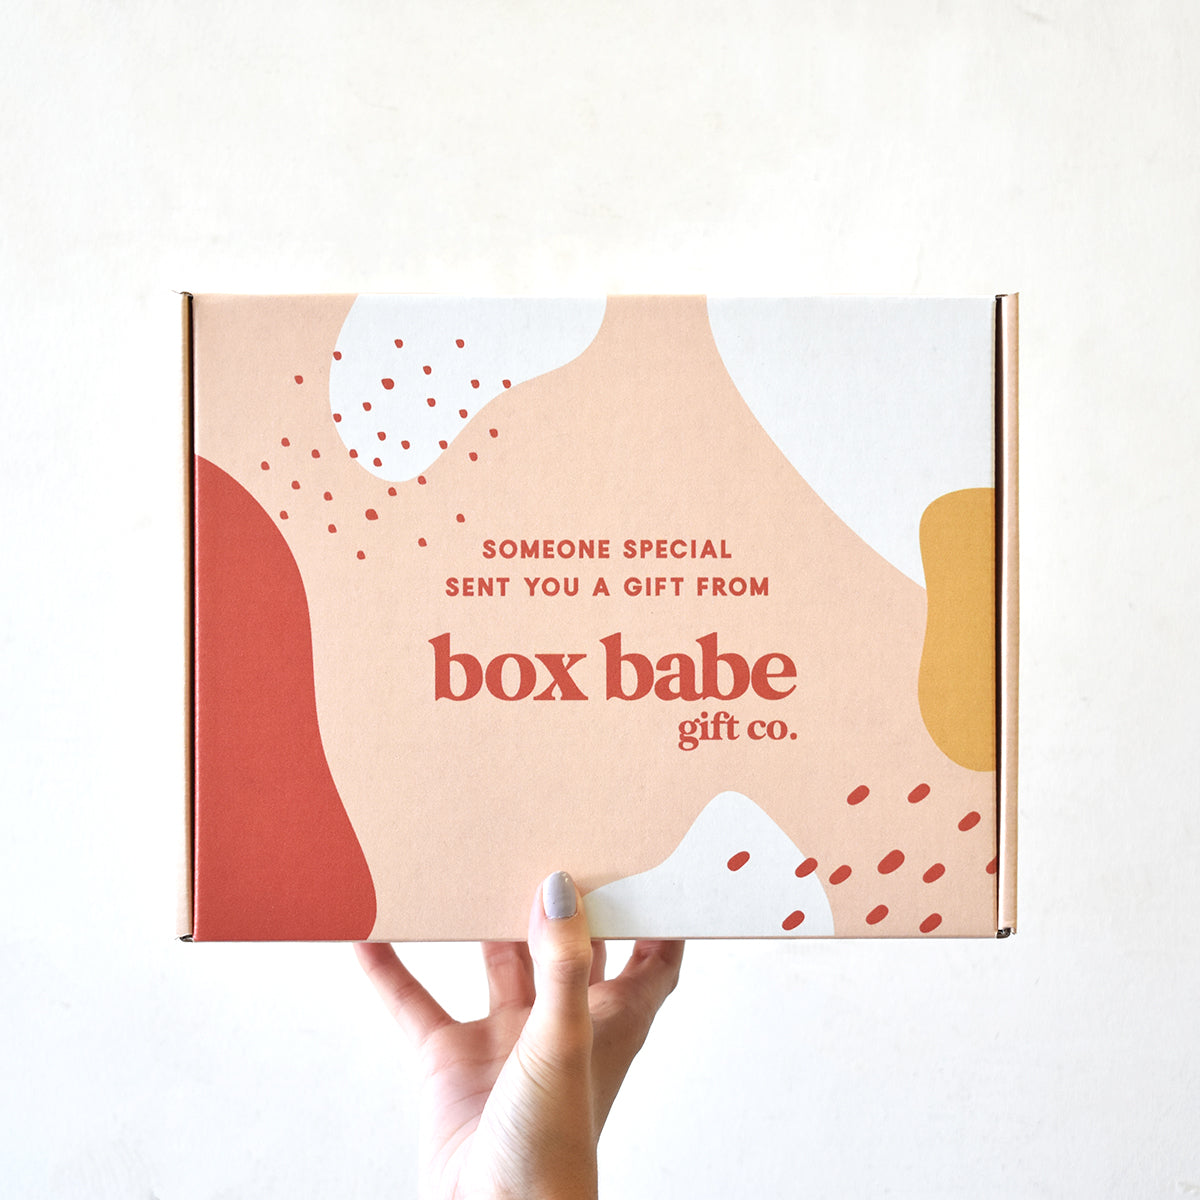 Cheers to You! - box babe gift co.